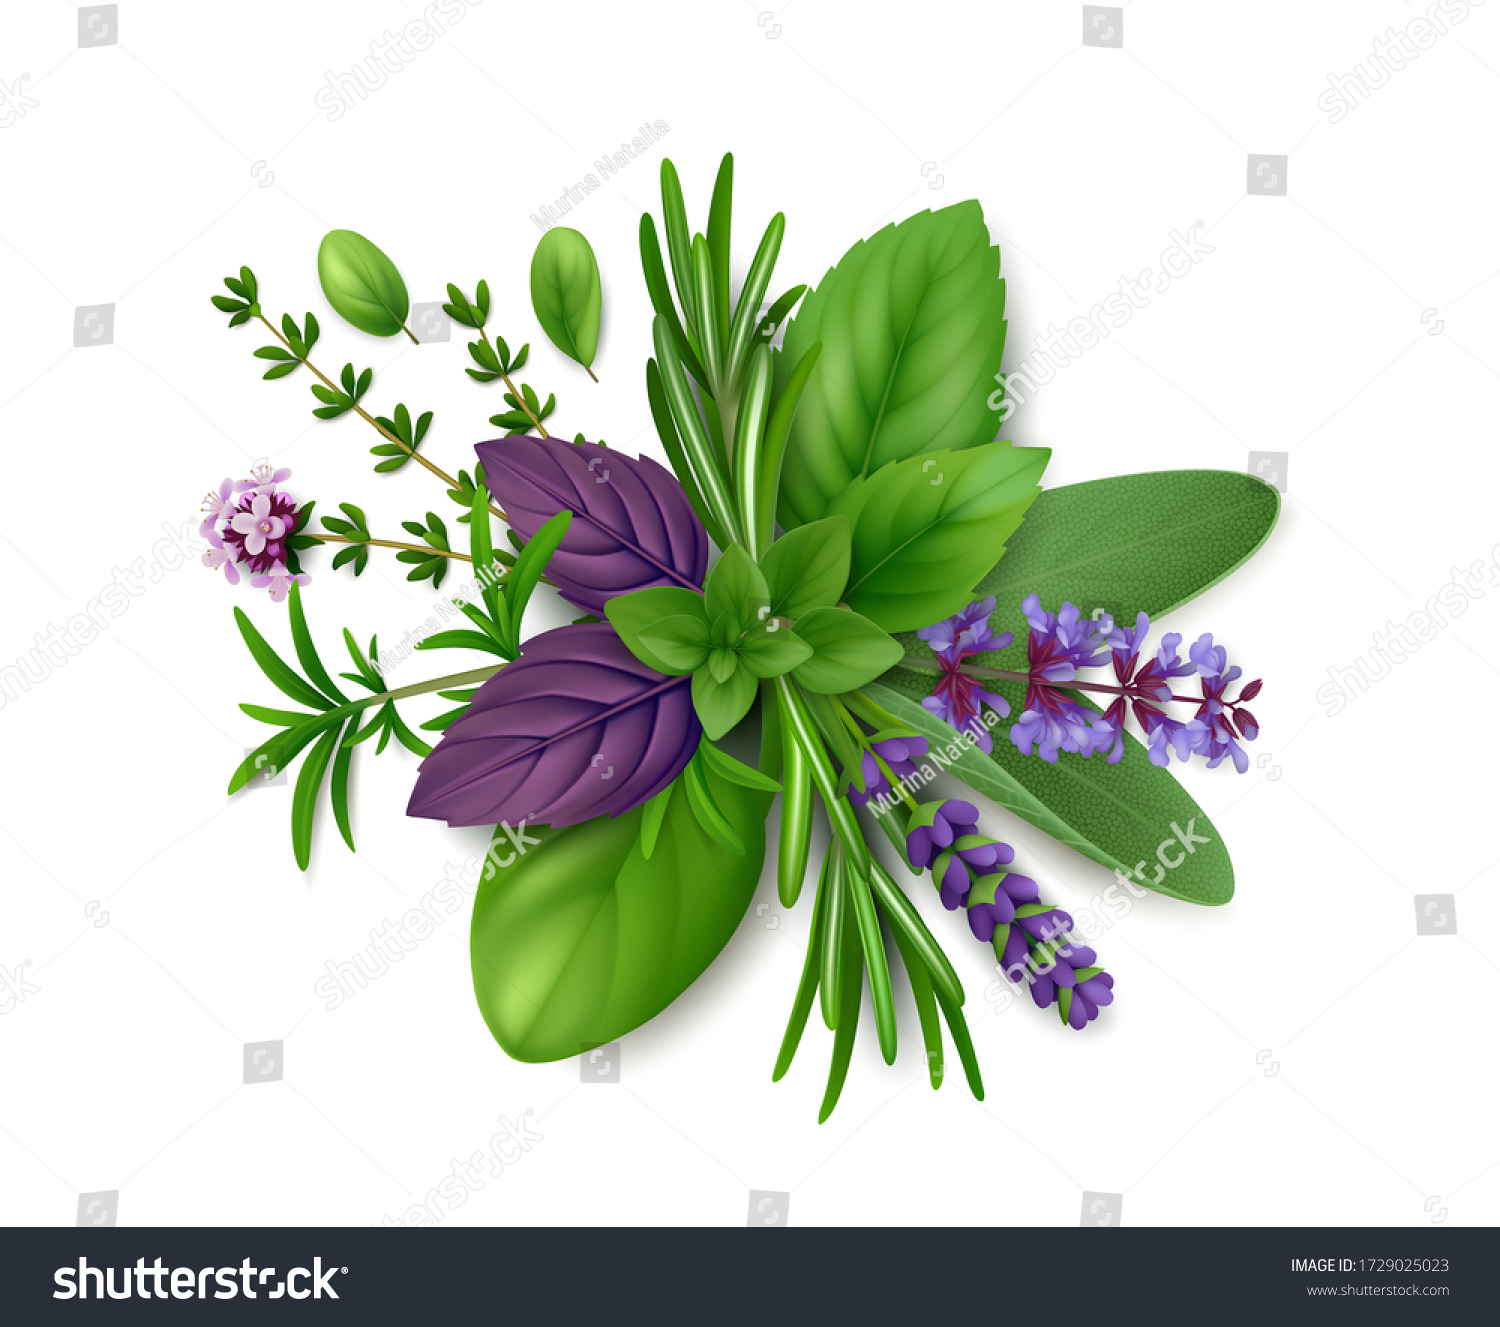 Bunch of fresh herbs de Provence: rosemary, summer savory, oregano, thyme, sage, lavender, mint, marjoram and basil (green and purple). Isolated on white background. Top view. Realistic illustration #1729025023